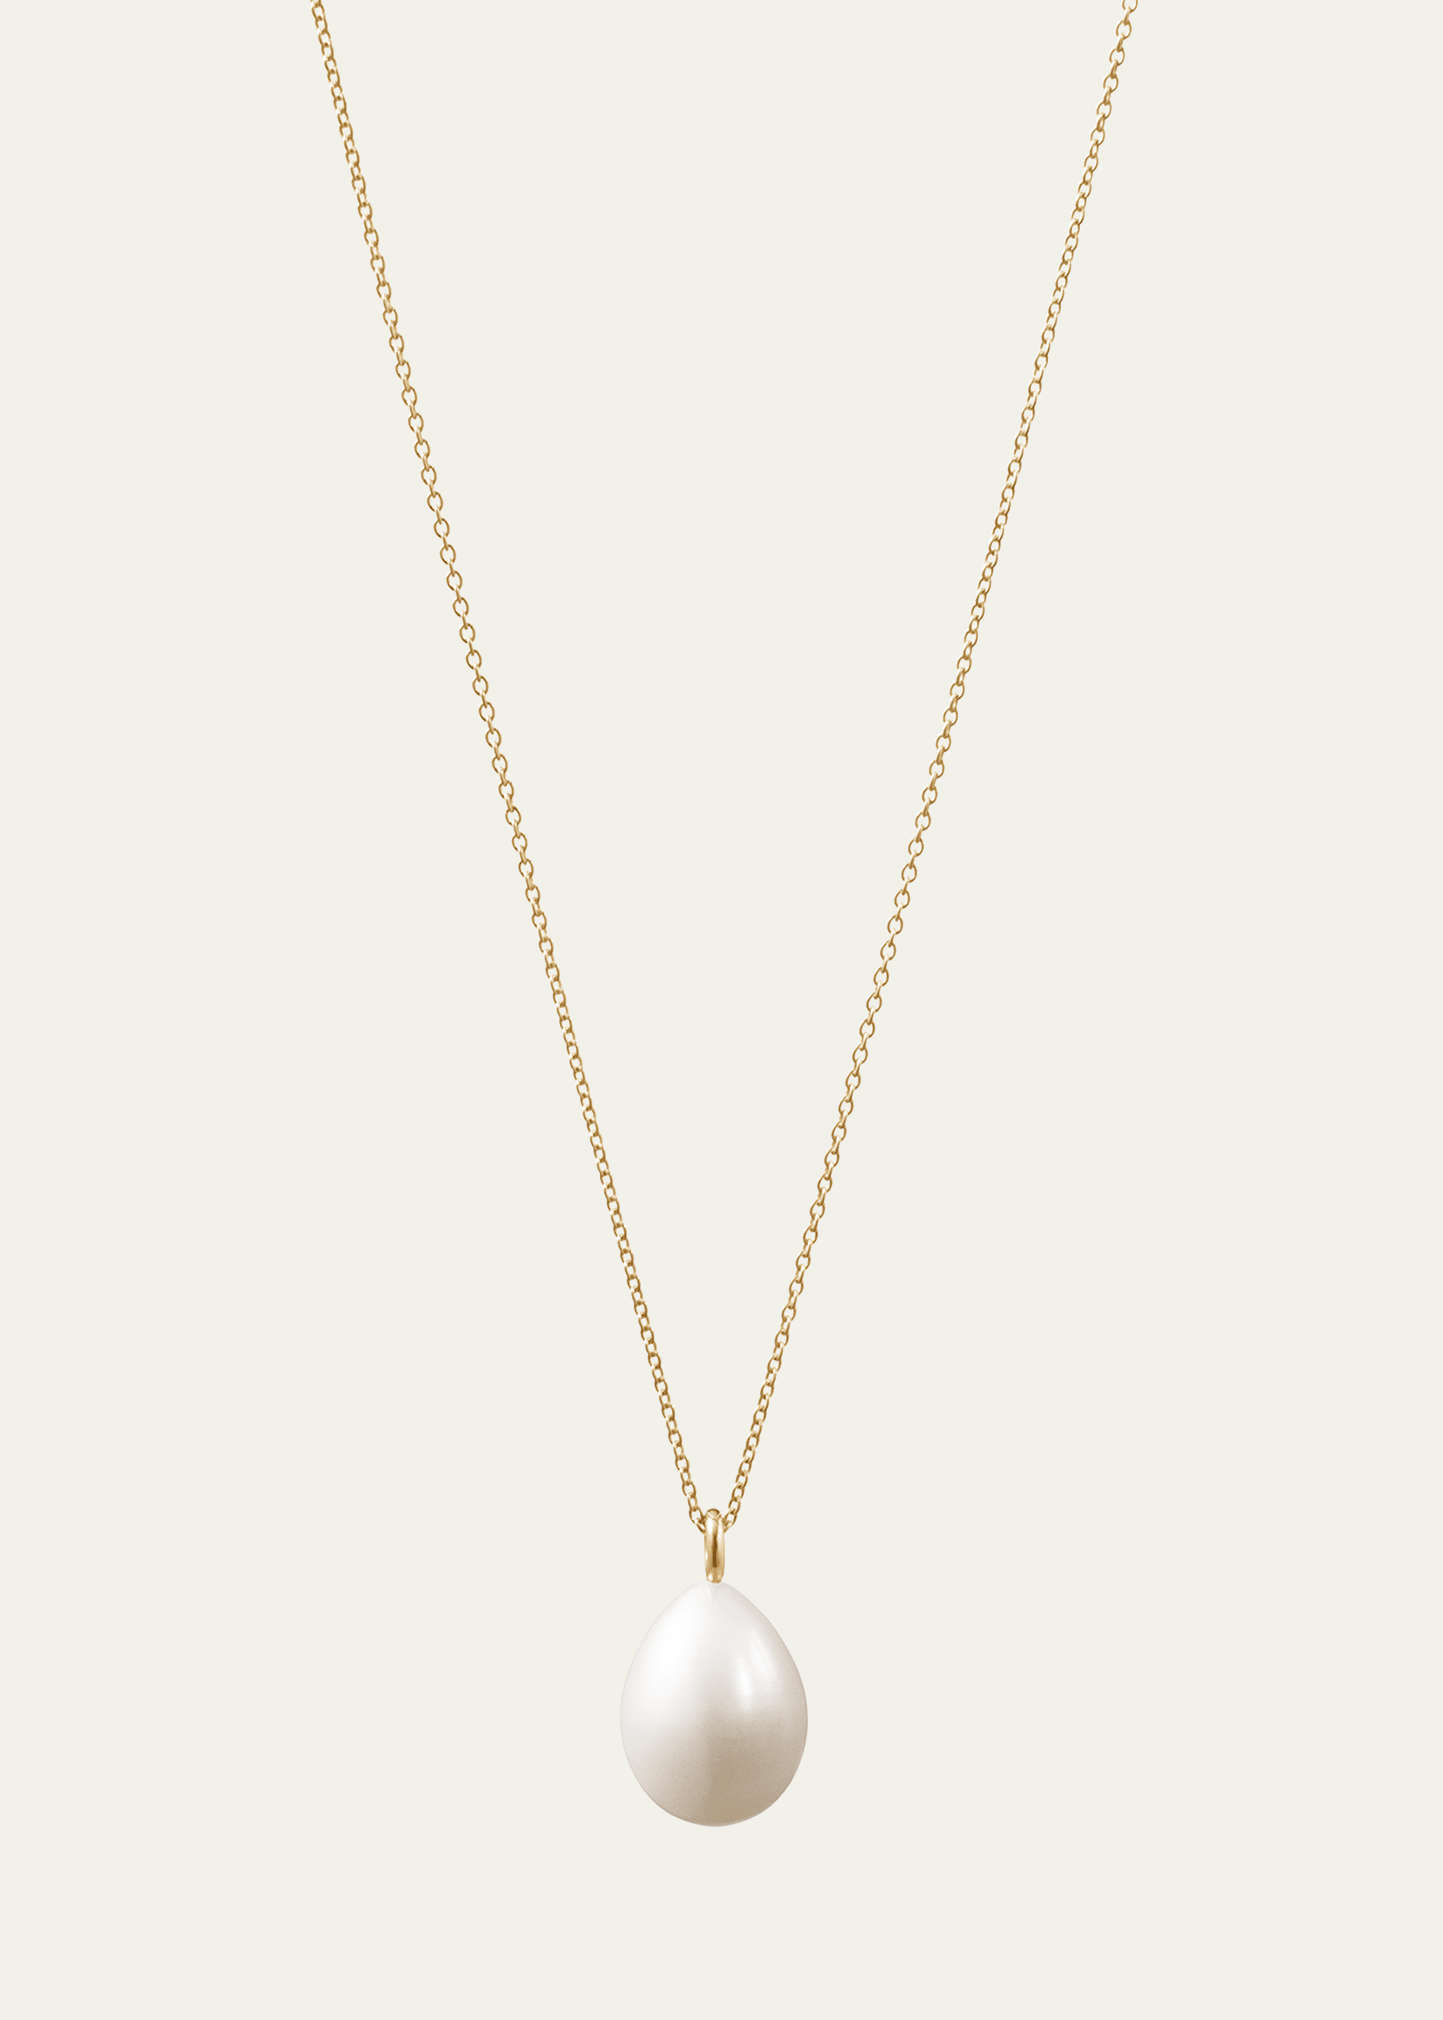 L Eau Drop Shaped Freshwater Pearl Pendant on 14K Yellow Gold Chain